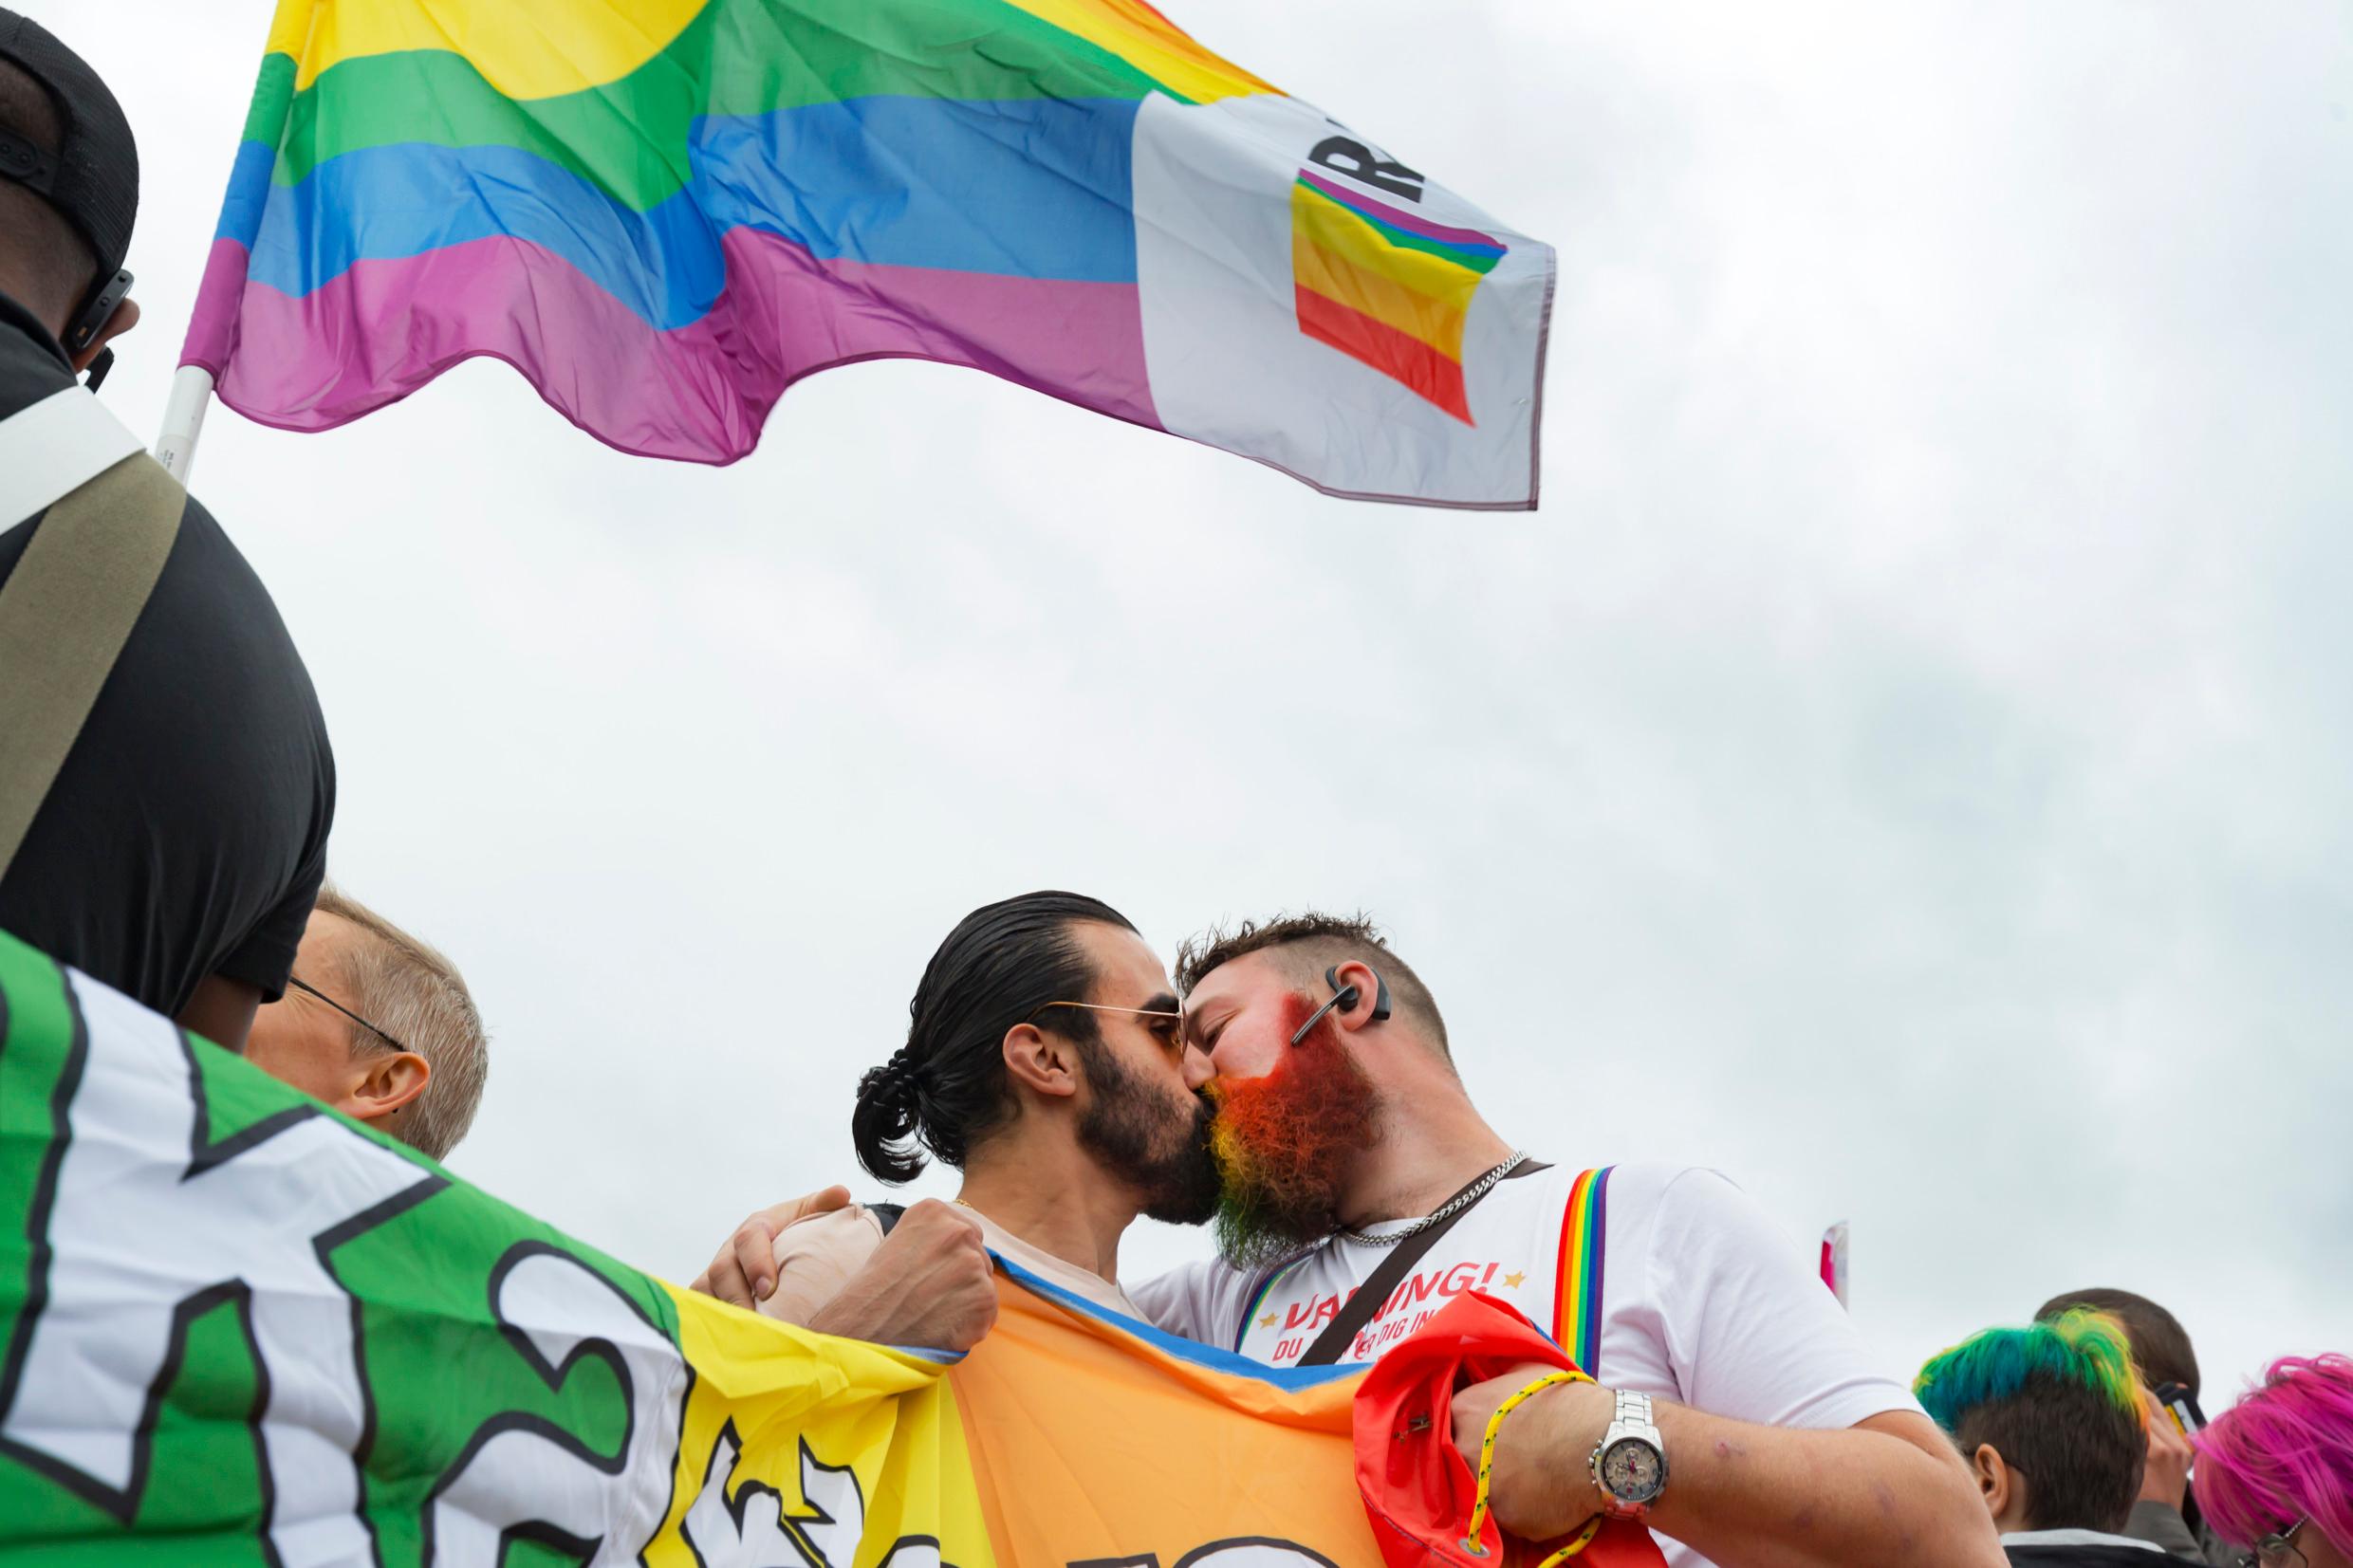 Two men kissing under a rainbow-coloured flag. LGBTQI rights are part of openness in Sweden.